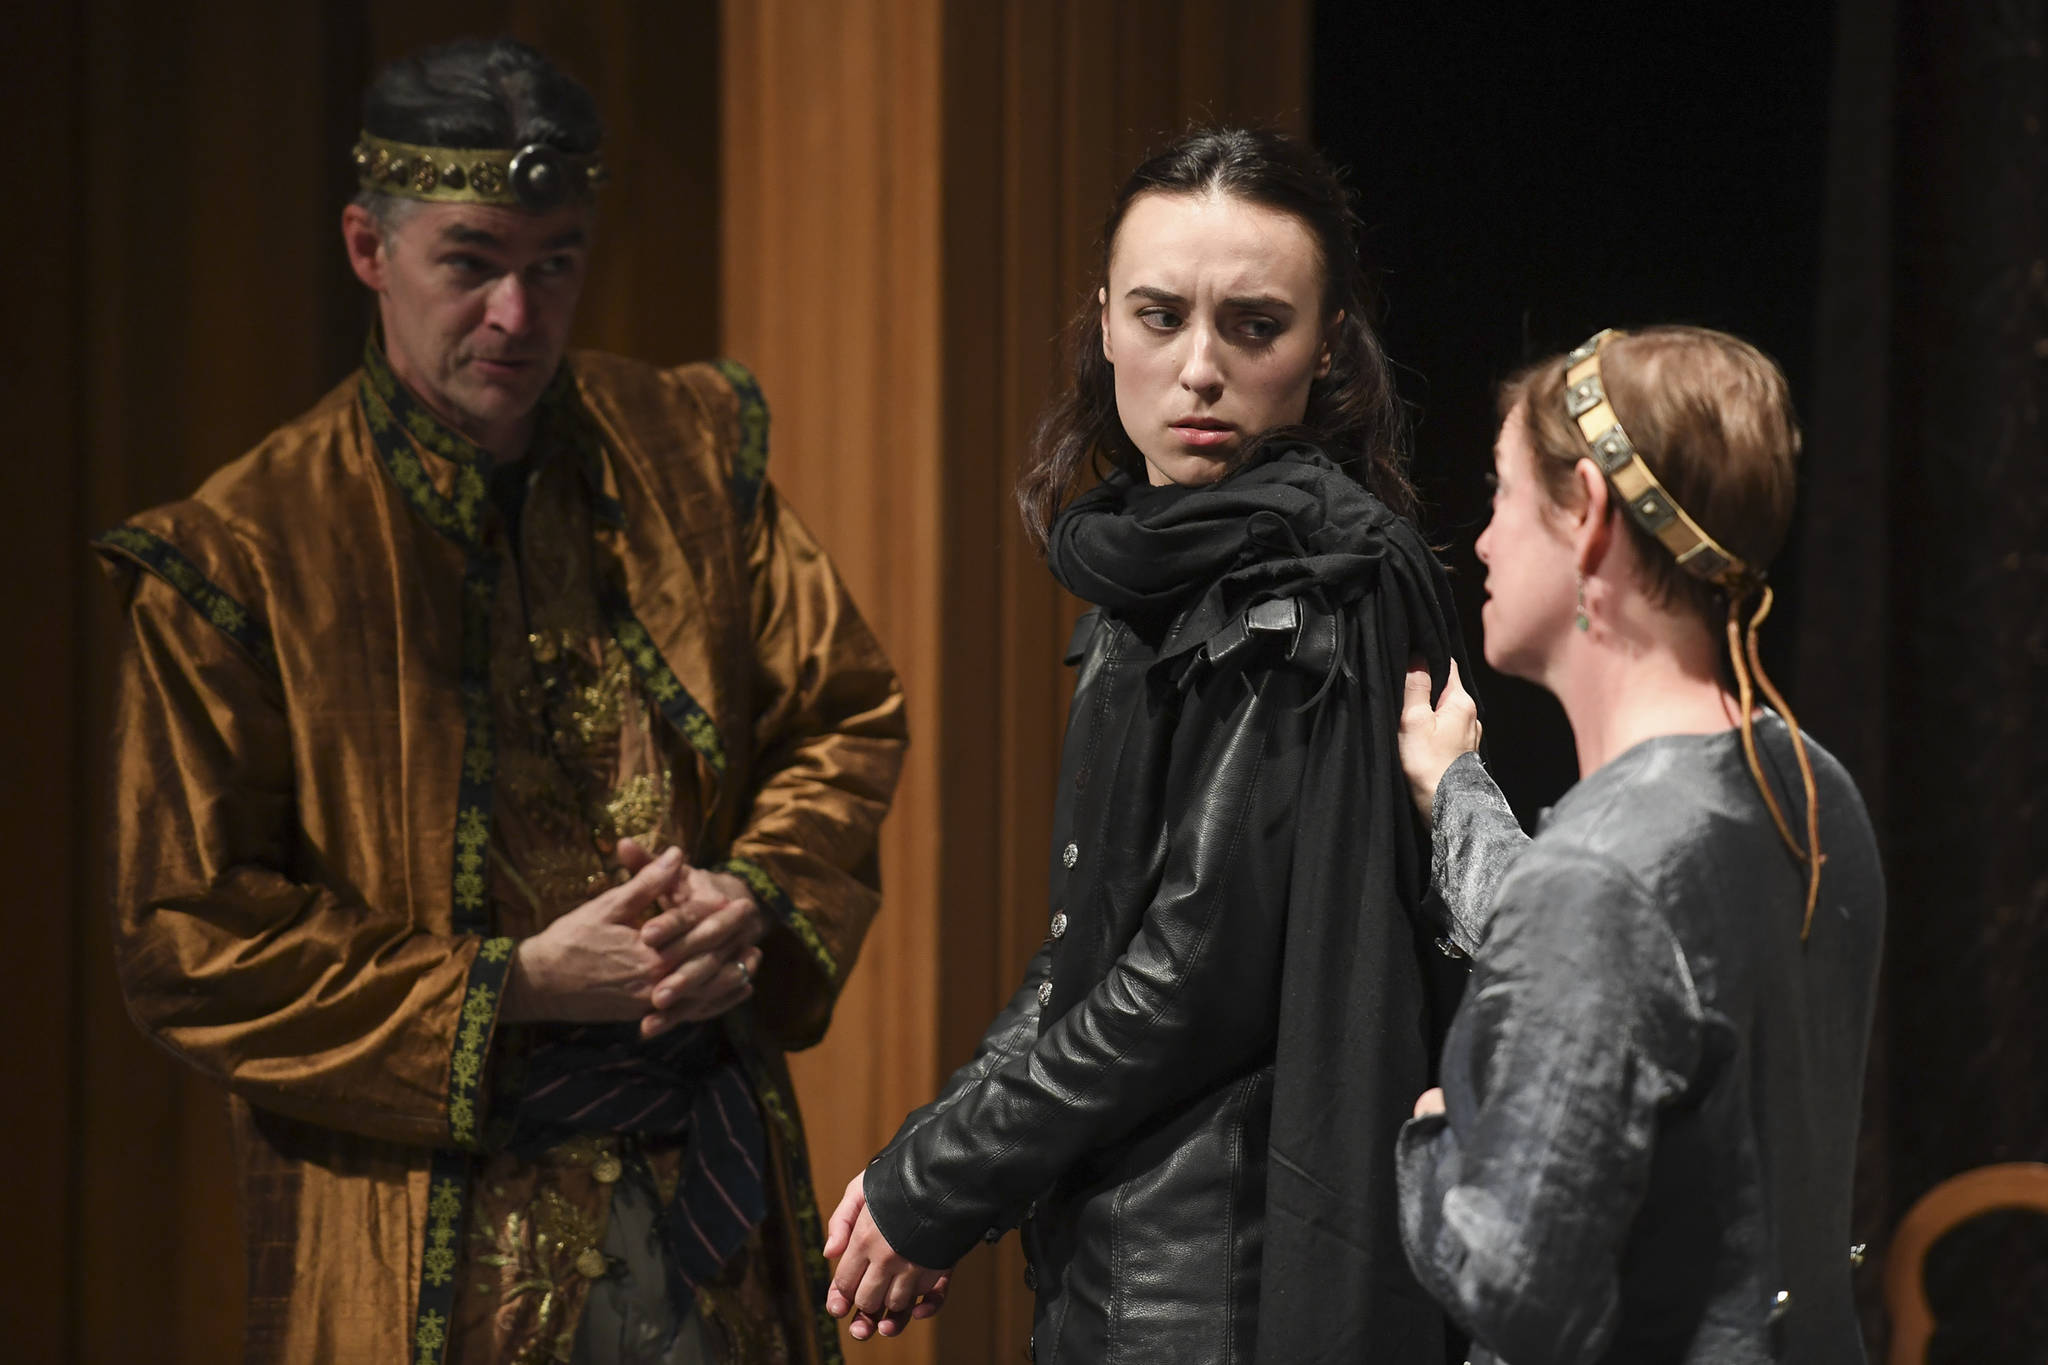 Natalia Spengler, center, plays Hamlet with Donice Gott, as his mother Gertrude, Queen of Denmark, and Aaron Elmore as Claudius, King of Denmark, during a performance of William Shakespeare’s “Hamlet” by Theatre in the Rough at McPhetres Hall on Tuesday, July 2, 2019. (Michael Penn | Juneau Empire)